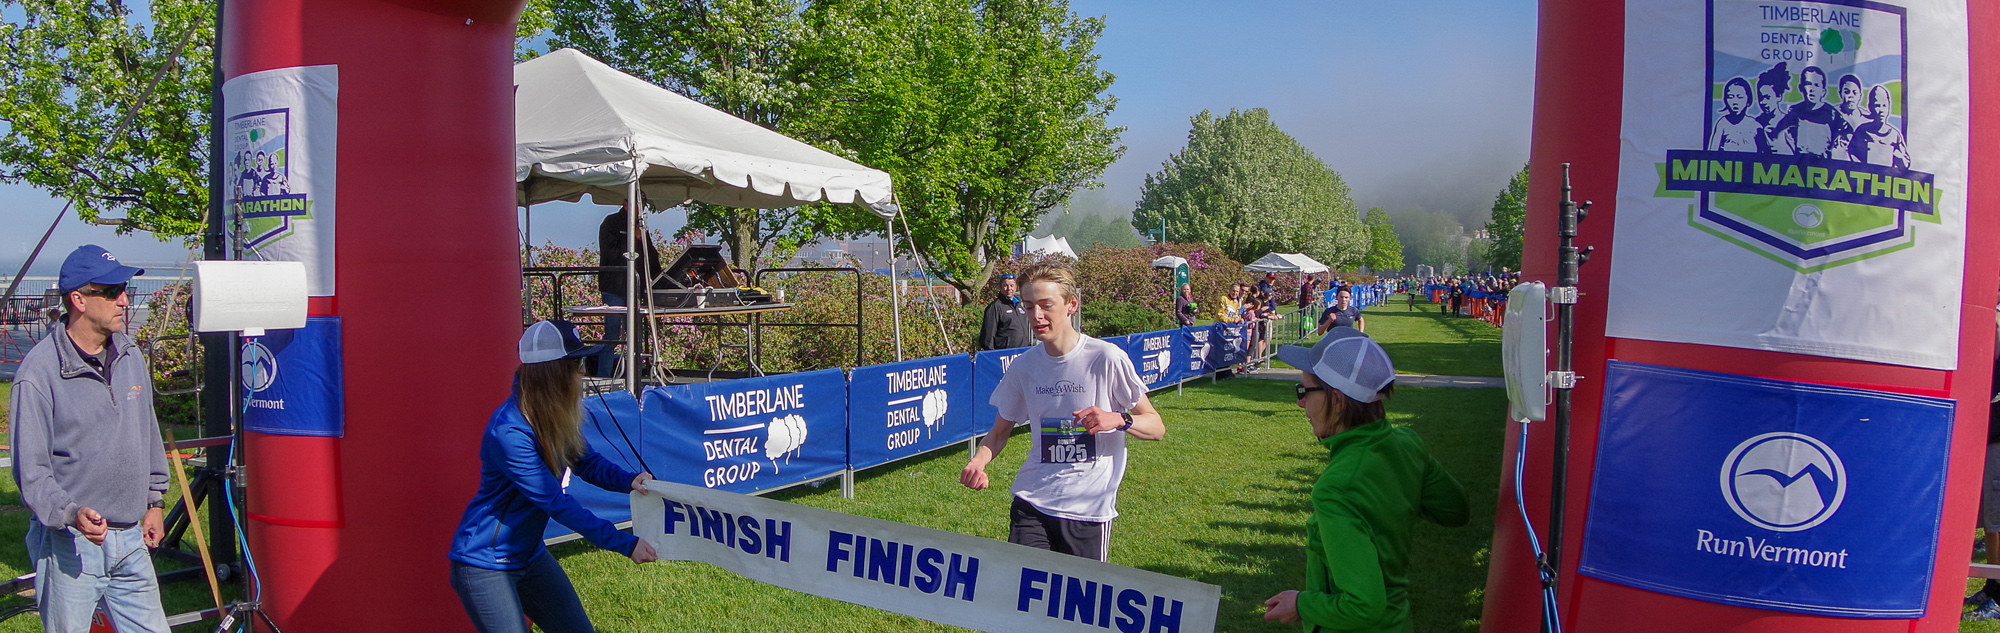 a Boy crossing the finish line